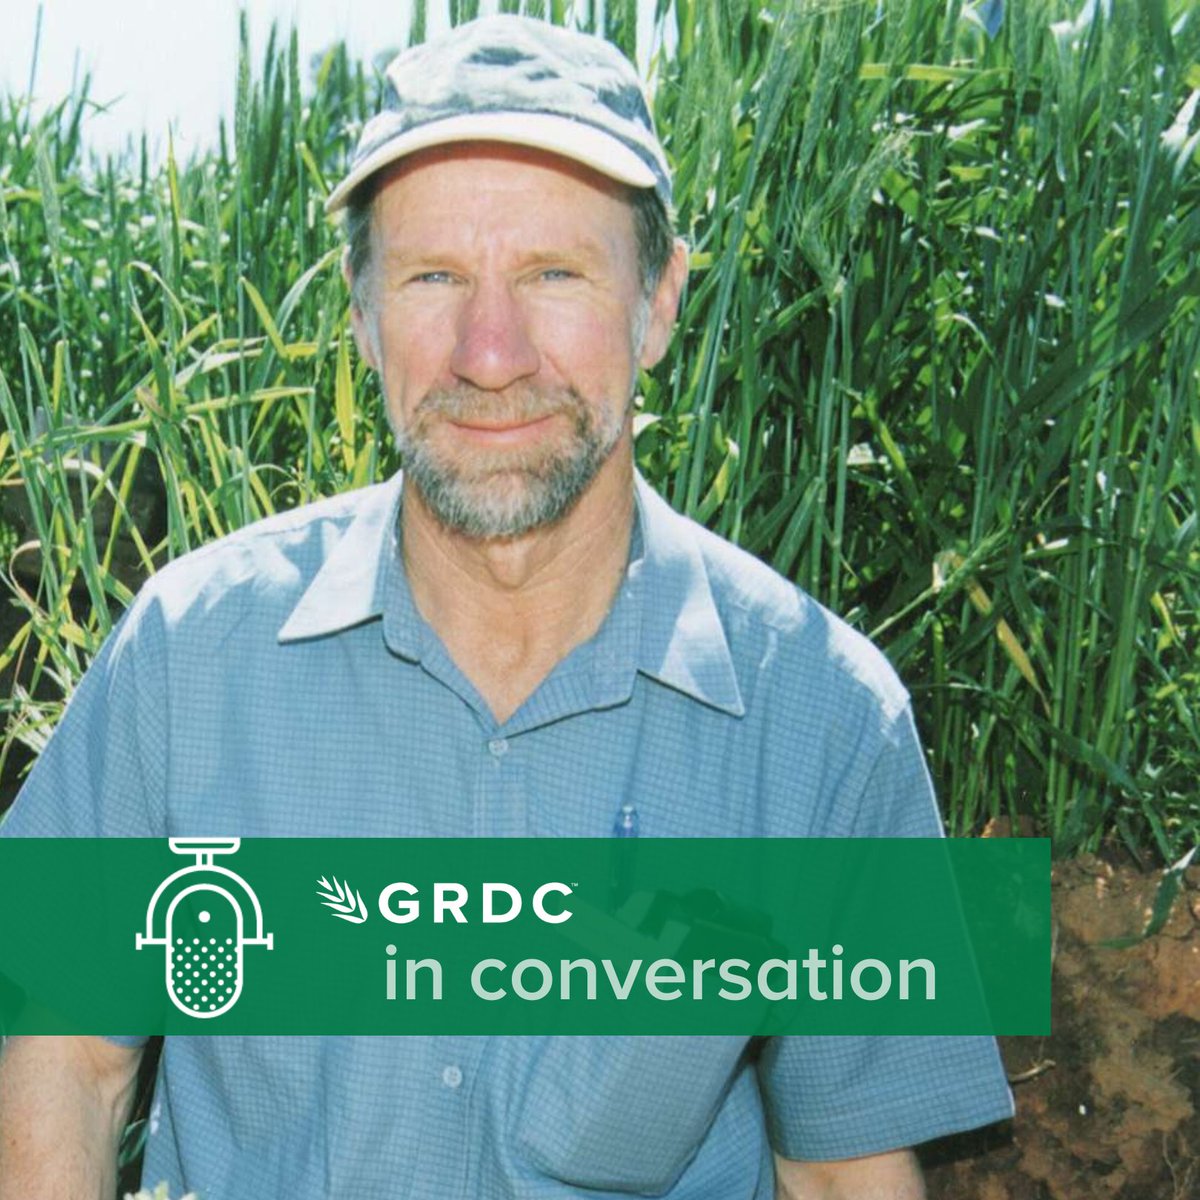 🎙️ NEW PODCAST 'GRDC in Conversation' is with the acclaimed Dr Allan Mayfield from the Eyre Peninsula who became a researcher in plant pathology & eventually started his own consultancy, all while over-achieving in running too! With @Olilelievre ▶️ bit.ly/3Dl2Jx6 🎧